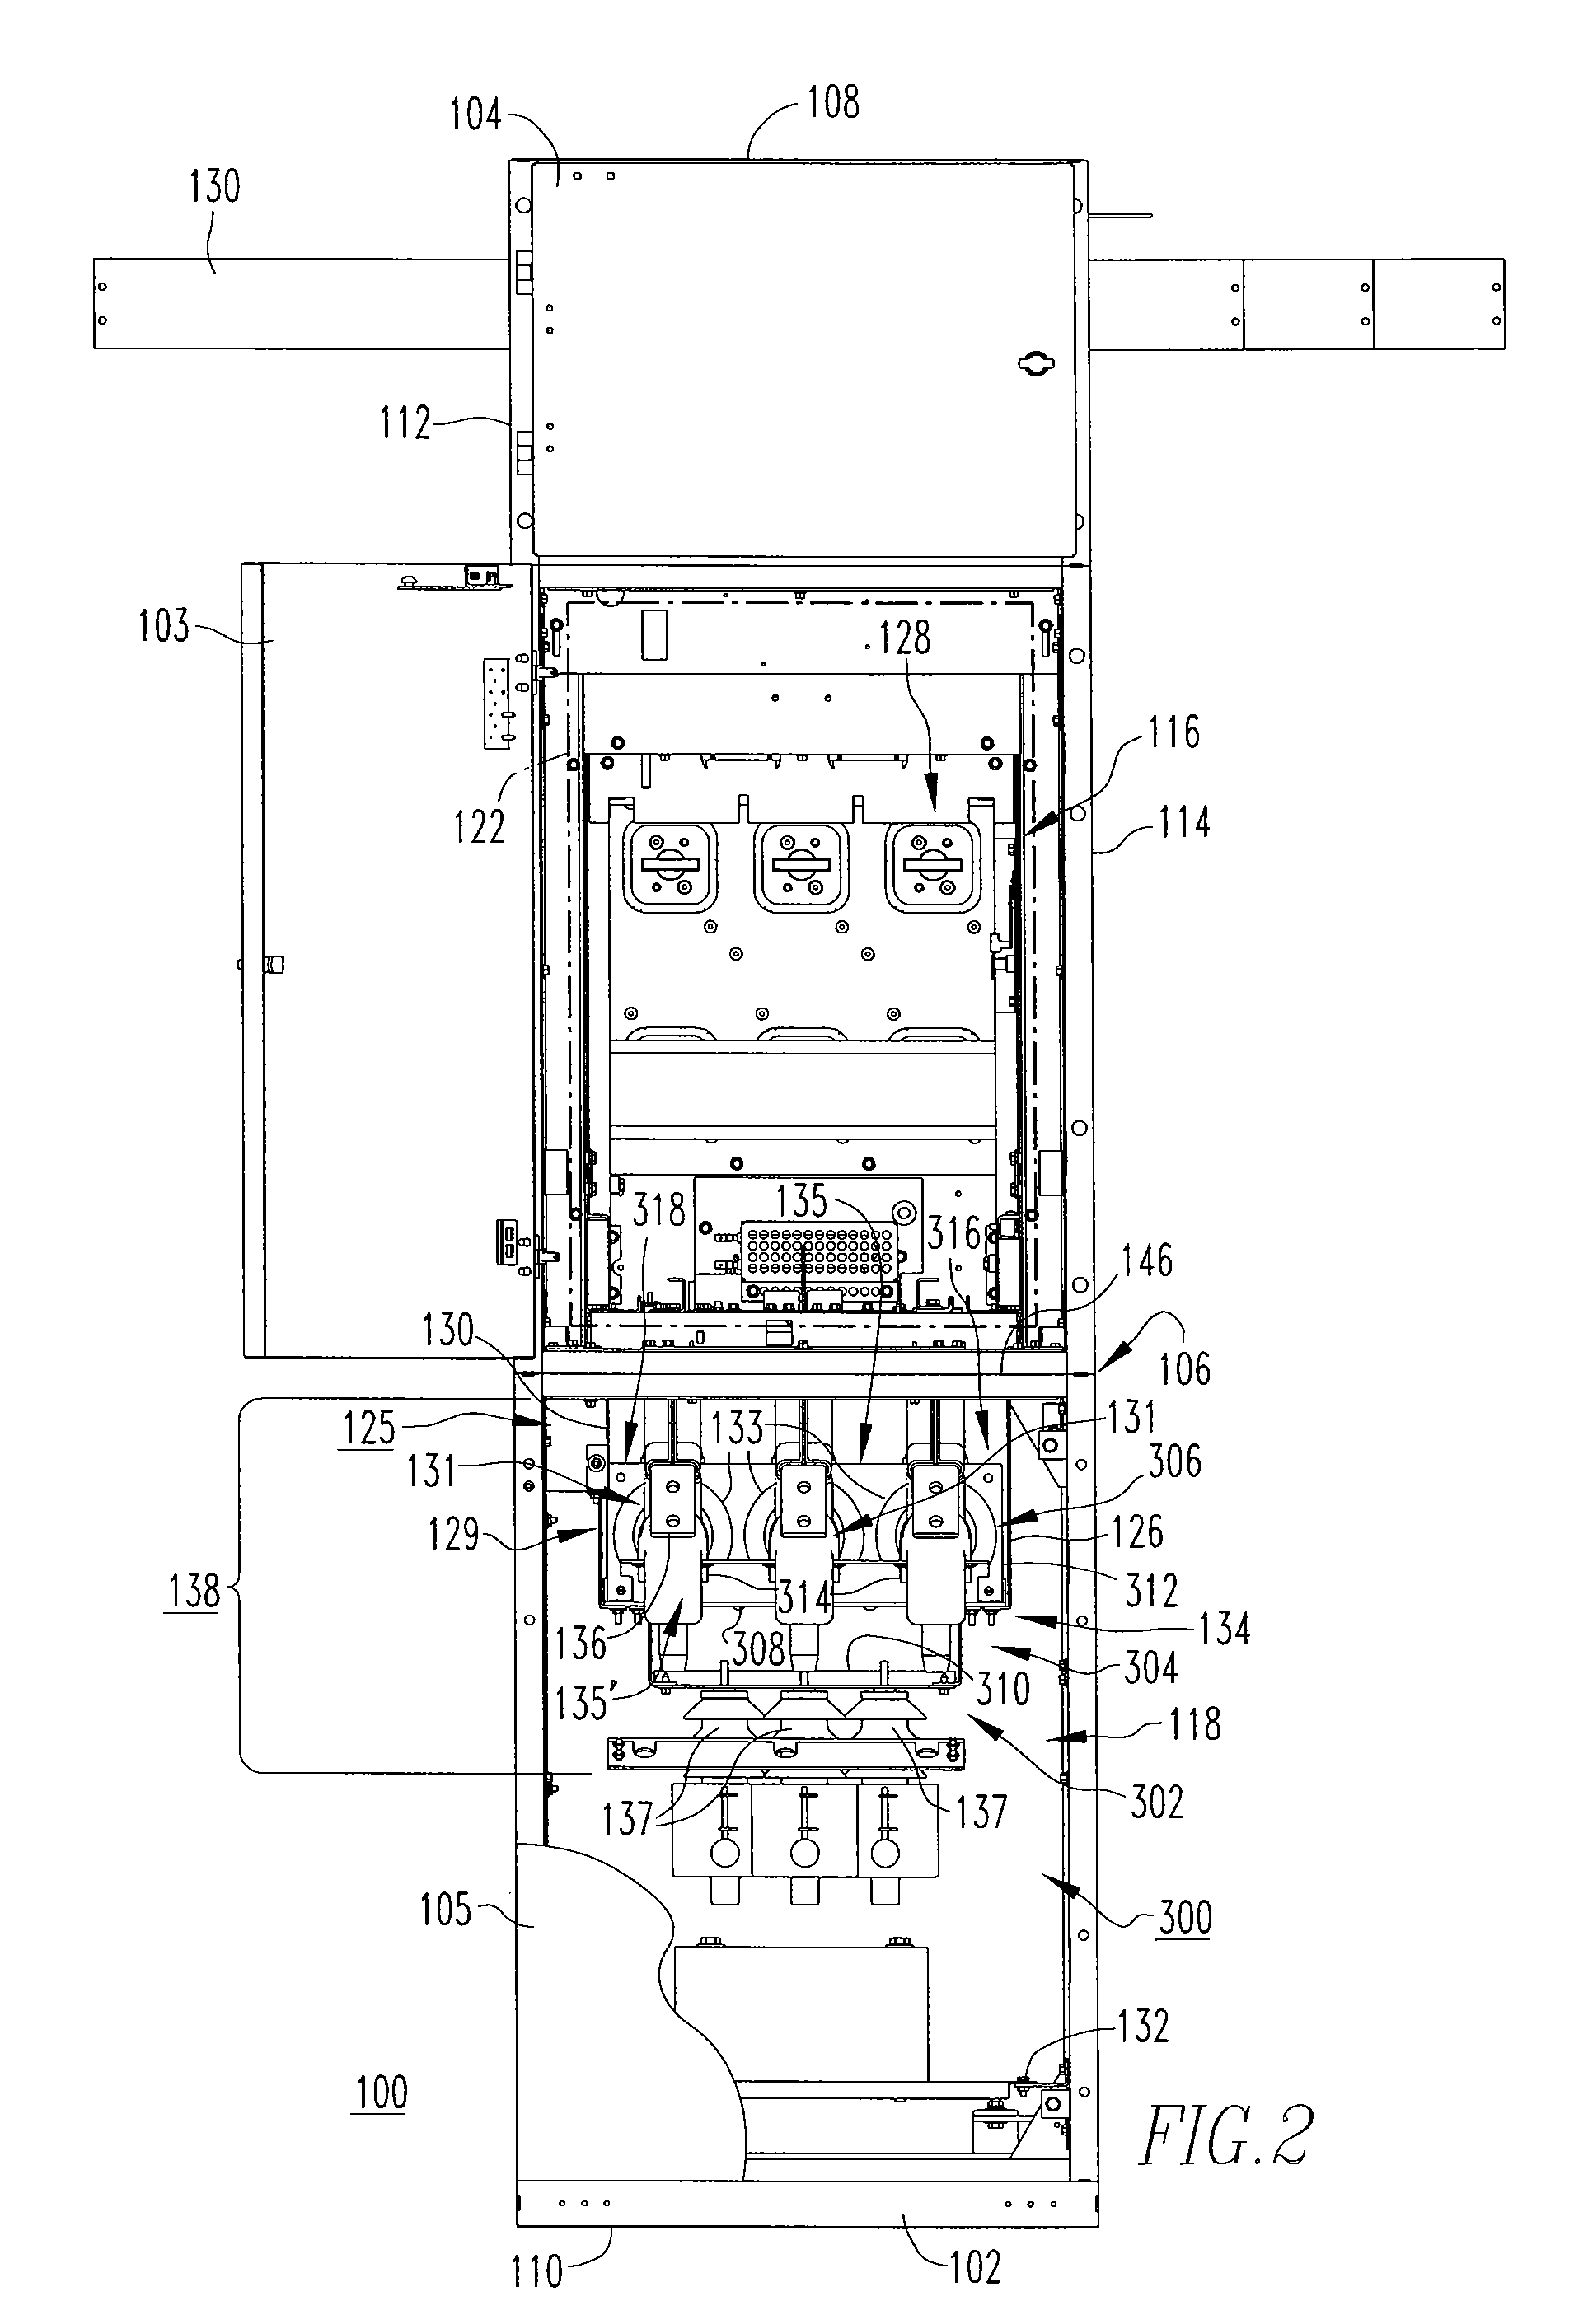 Electrical bus member mounting system and electrical enclosure employing the same